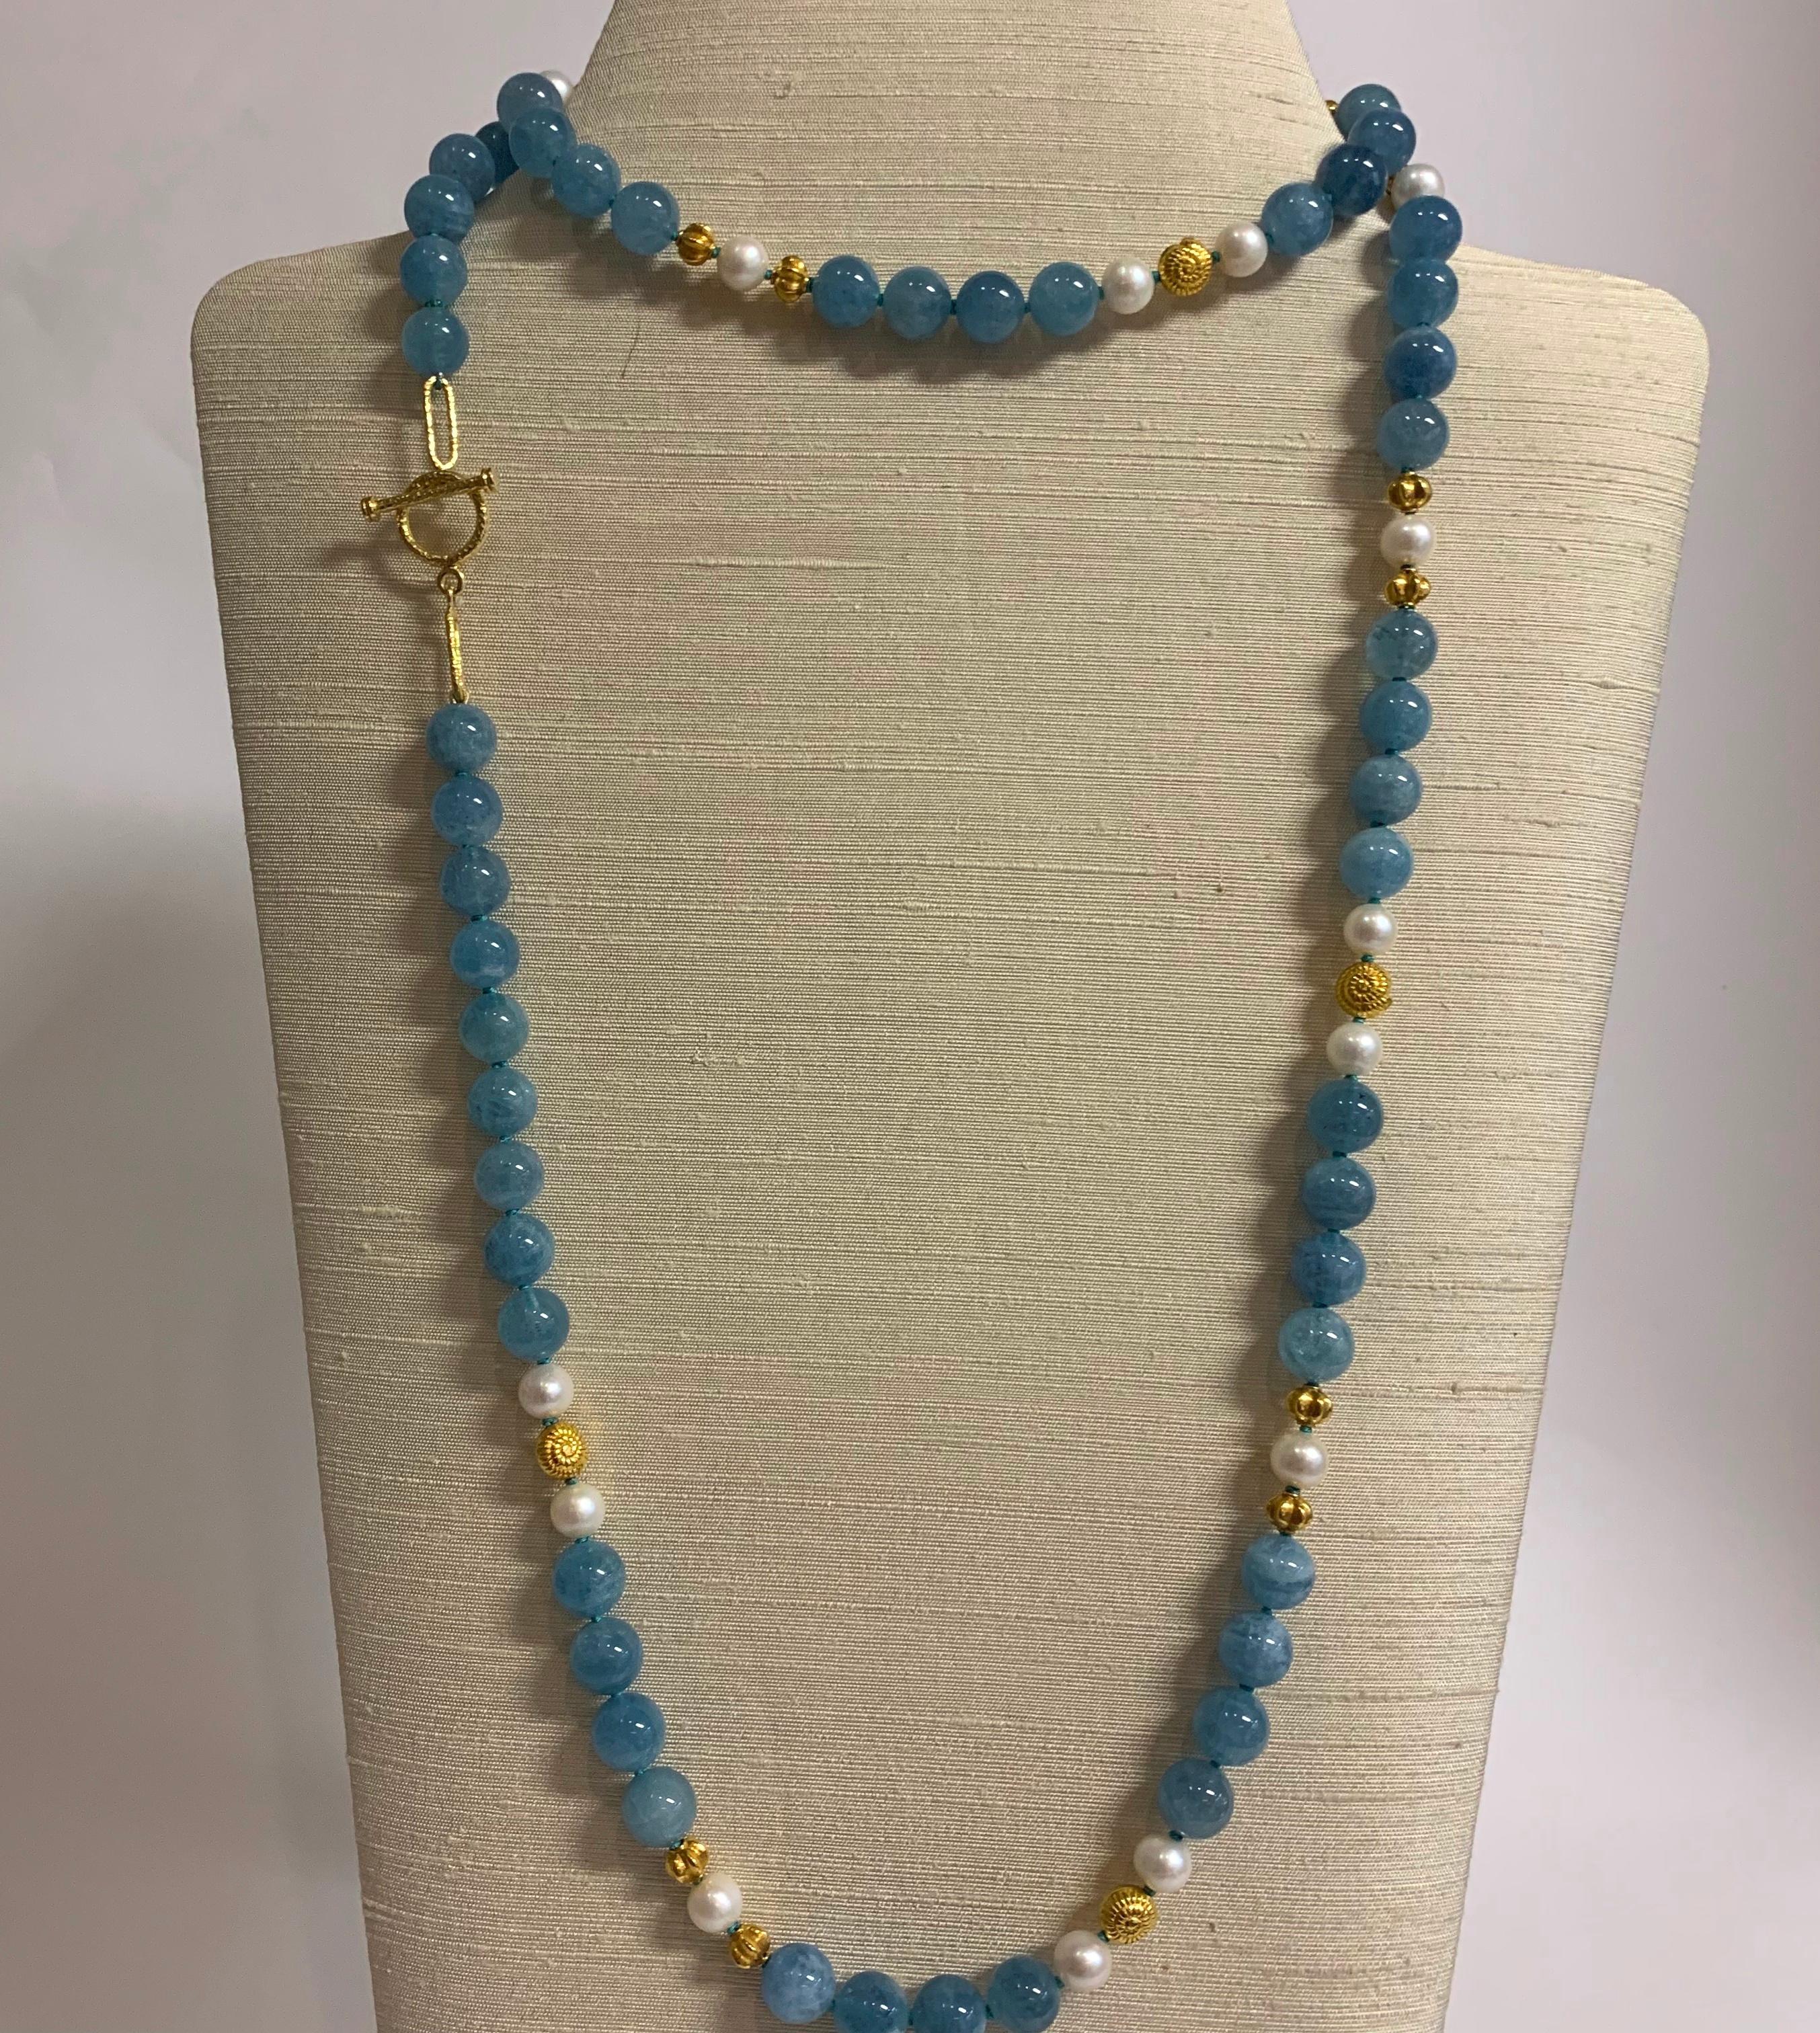 The strong blue colour of the aquamarine beads are accentuated by freshwater pearls & 18k gold beads. His striking necklace at 42” is long enough to twist twice around the neck, or wear long.

Designed by AMANDA CLARK for Altfield, our collection